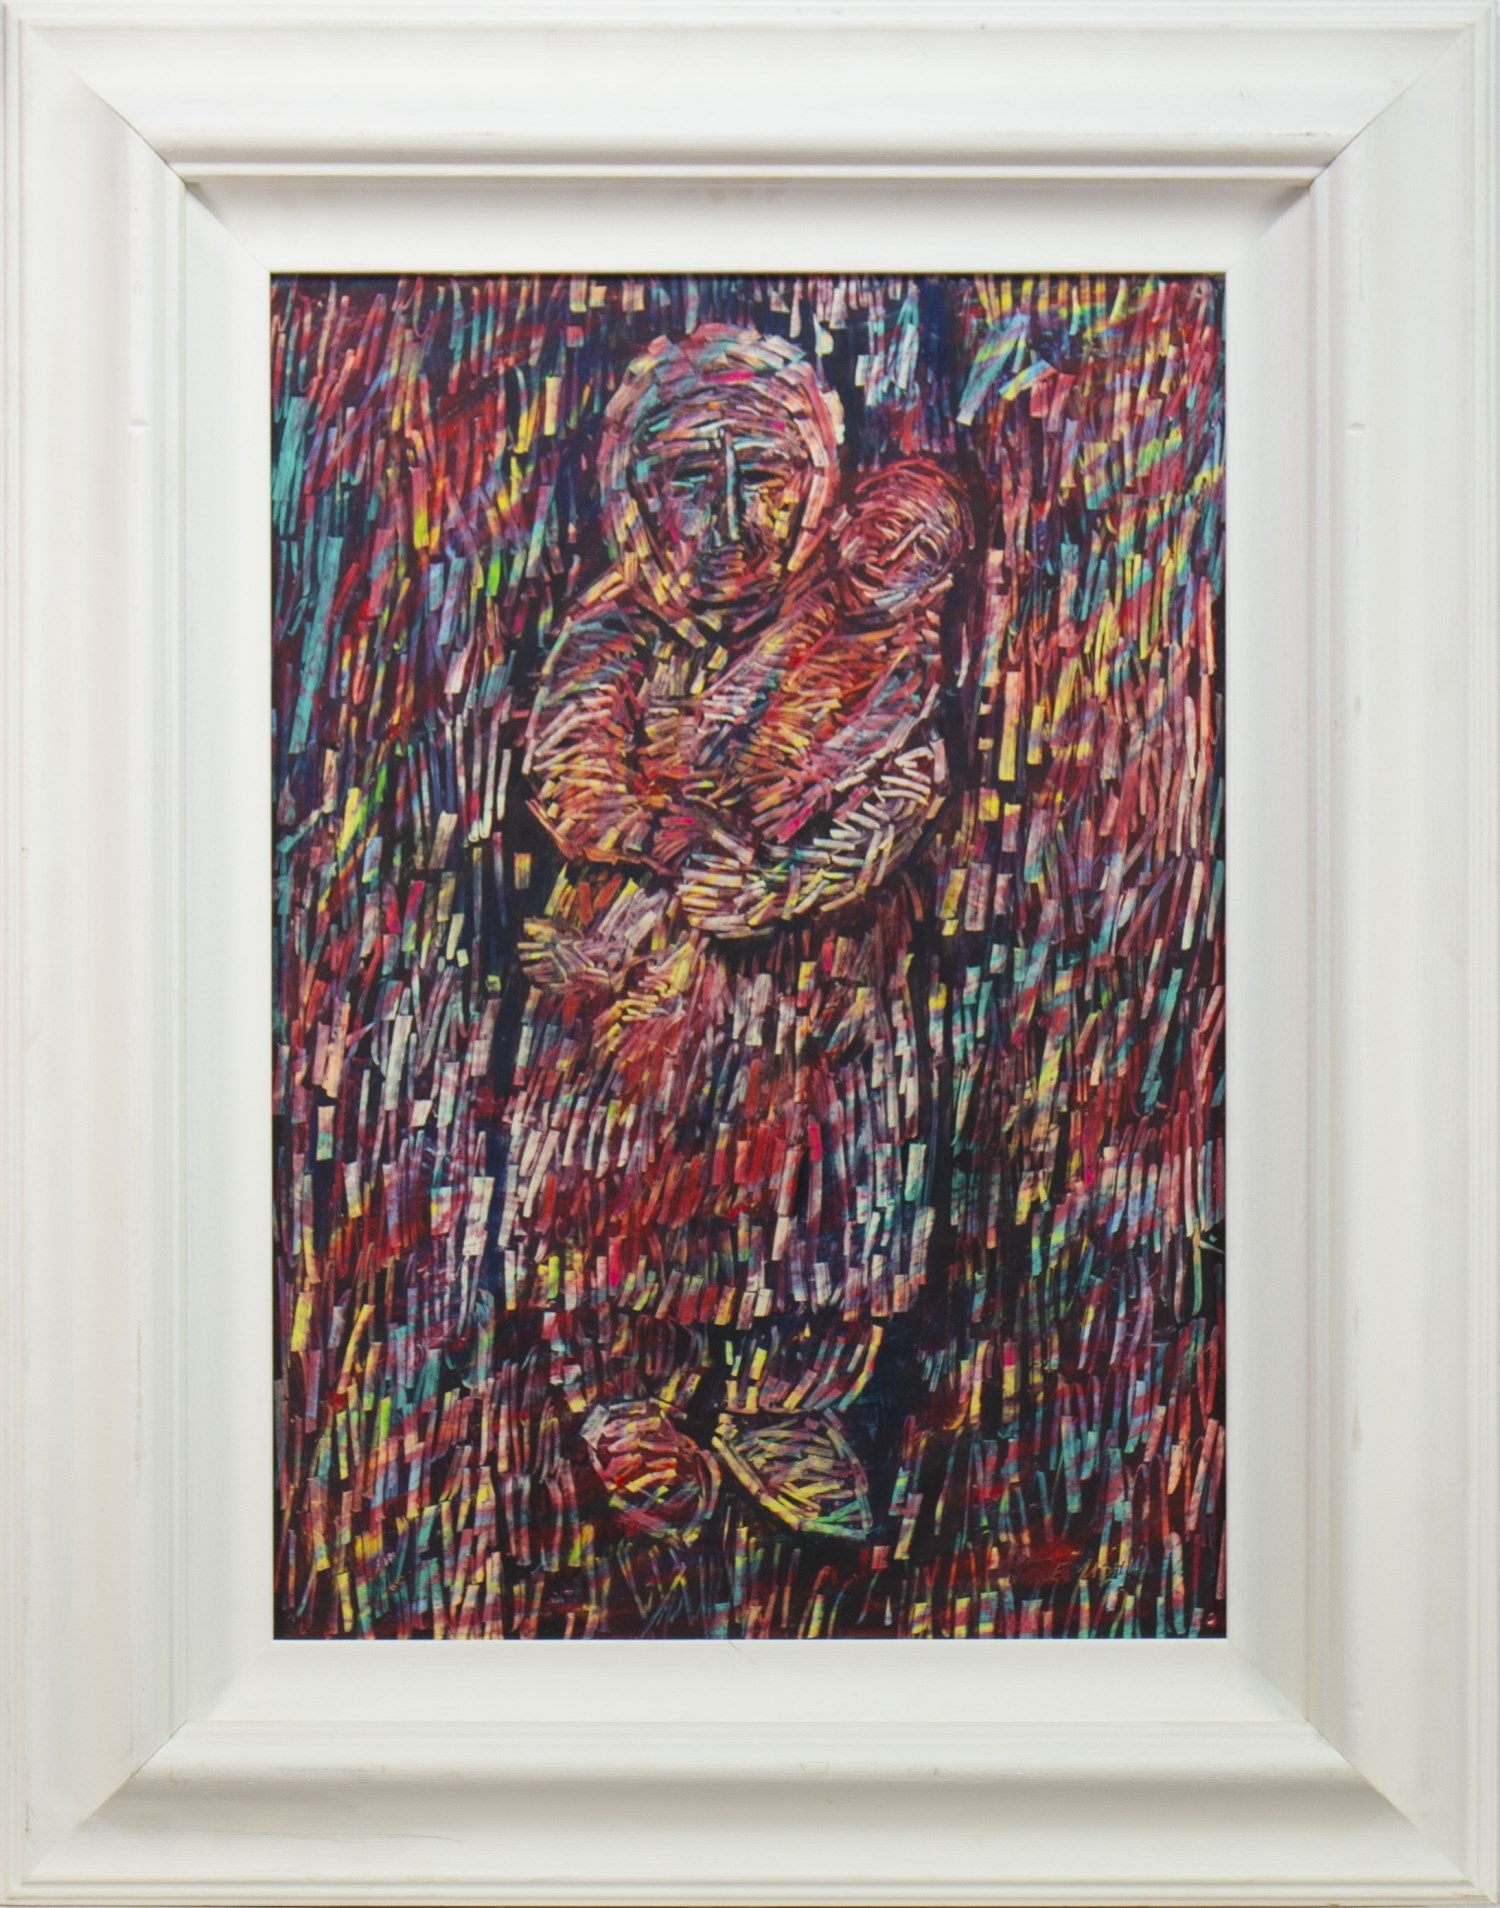 MOTHER AND CHILD, A PRINT BY ROBERT MEMISHI